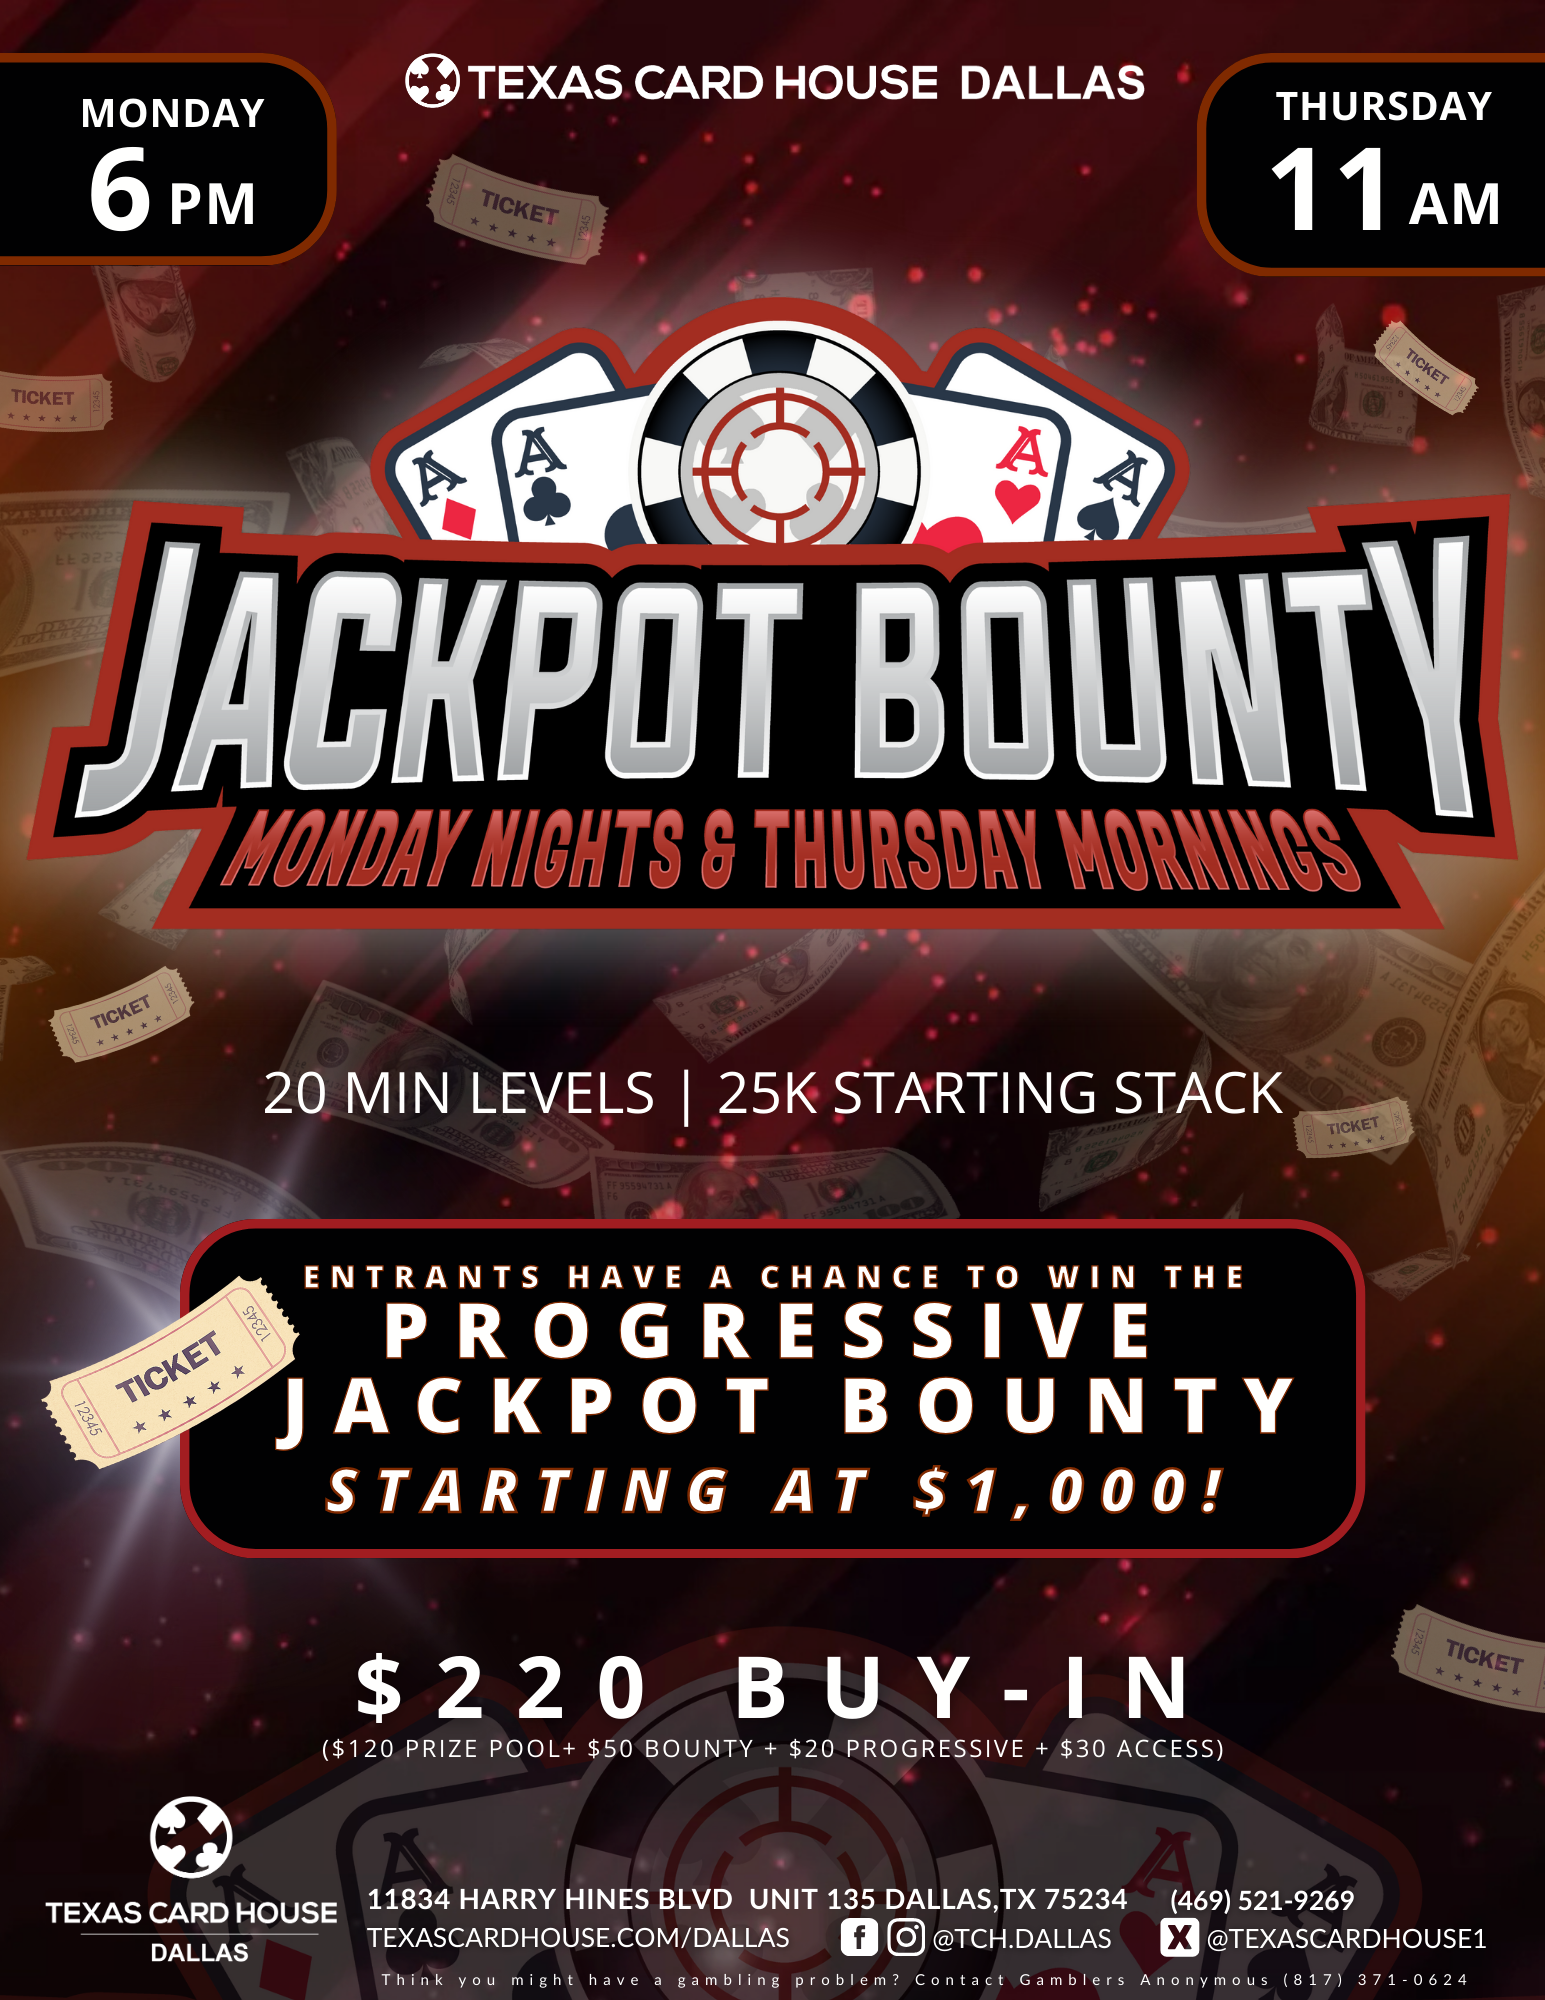 Monday-nights-6PM-and-Thursday-mornings-11AM-JACKPOT-BOUNTY-TCH-DTX